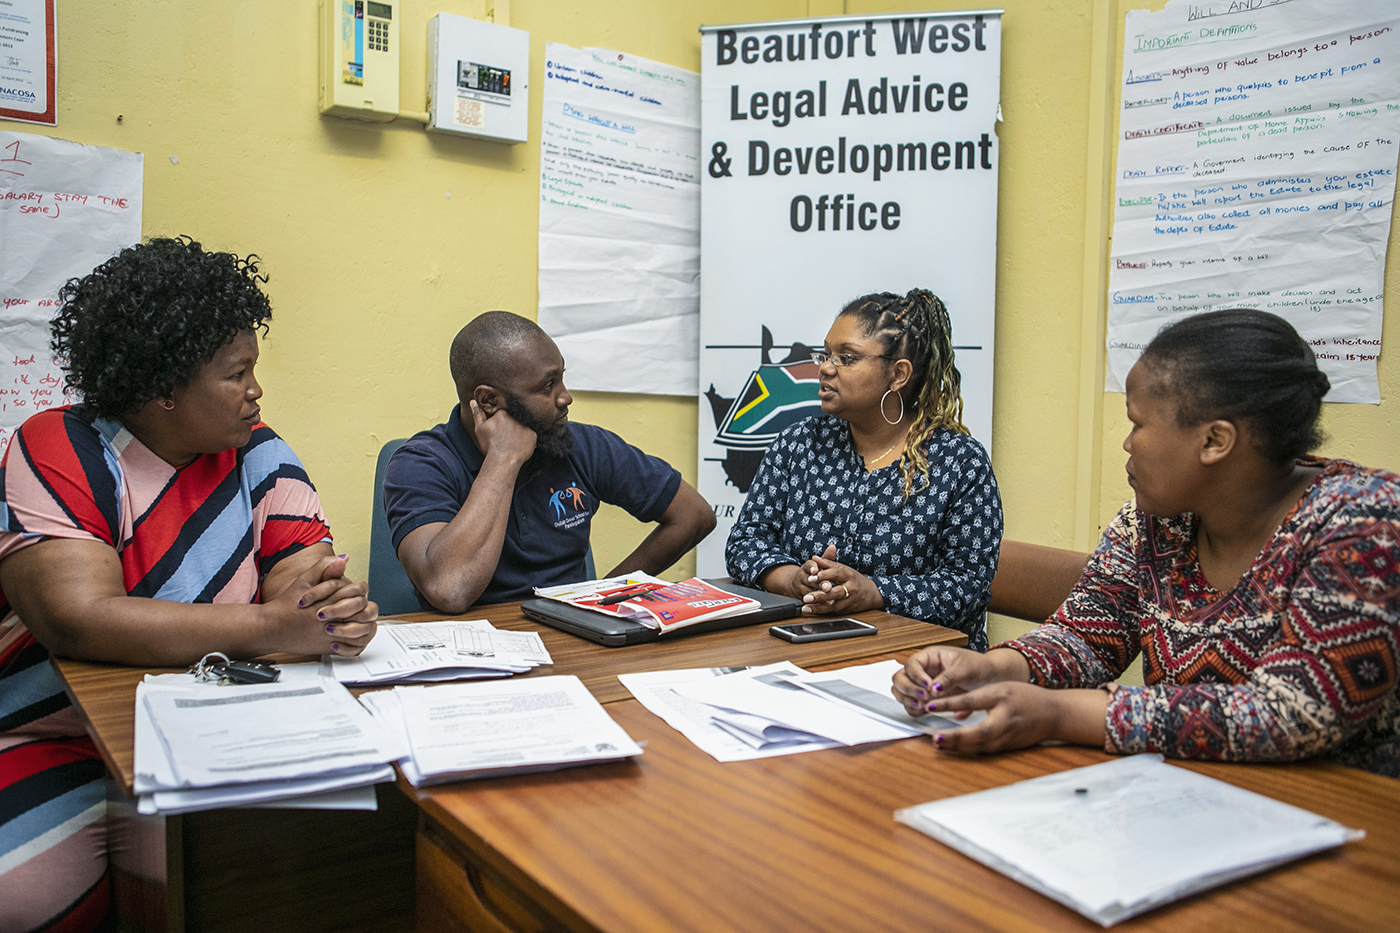 Colleen Julies of Social Change Assistance Trust speaks with paralegals at the Beaufort West Legal Advice and Development Office in South Africa.